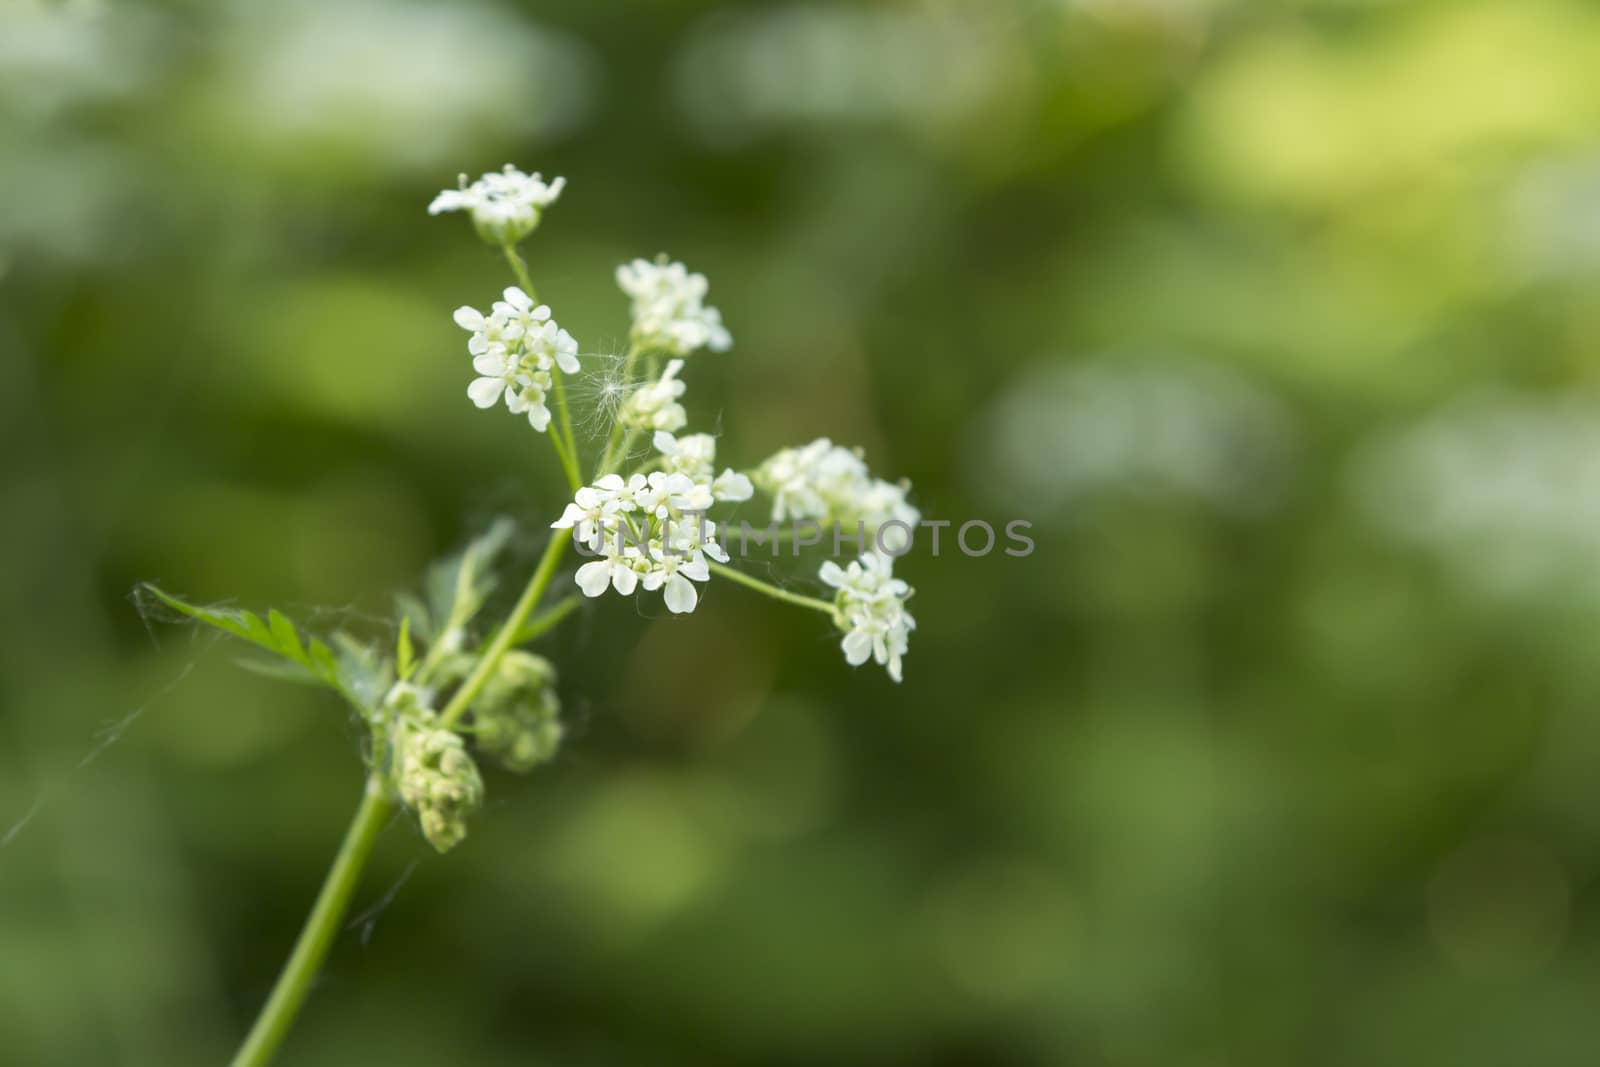 An isolated flower in a lush envirionment with some bokeh